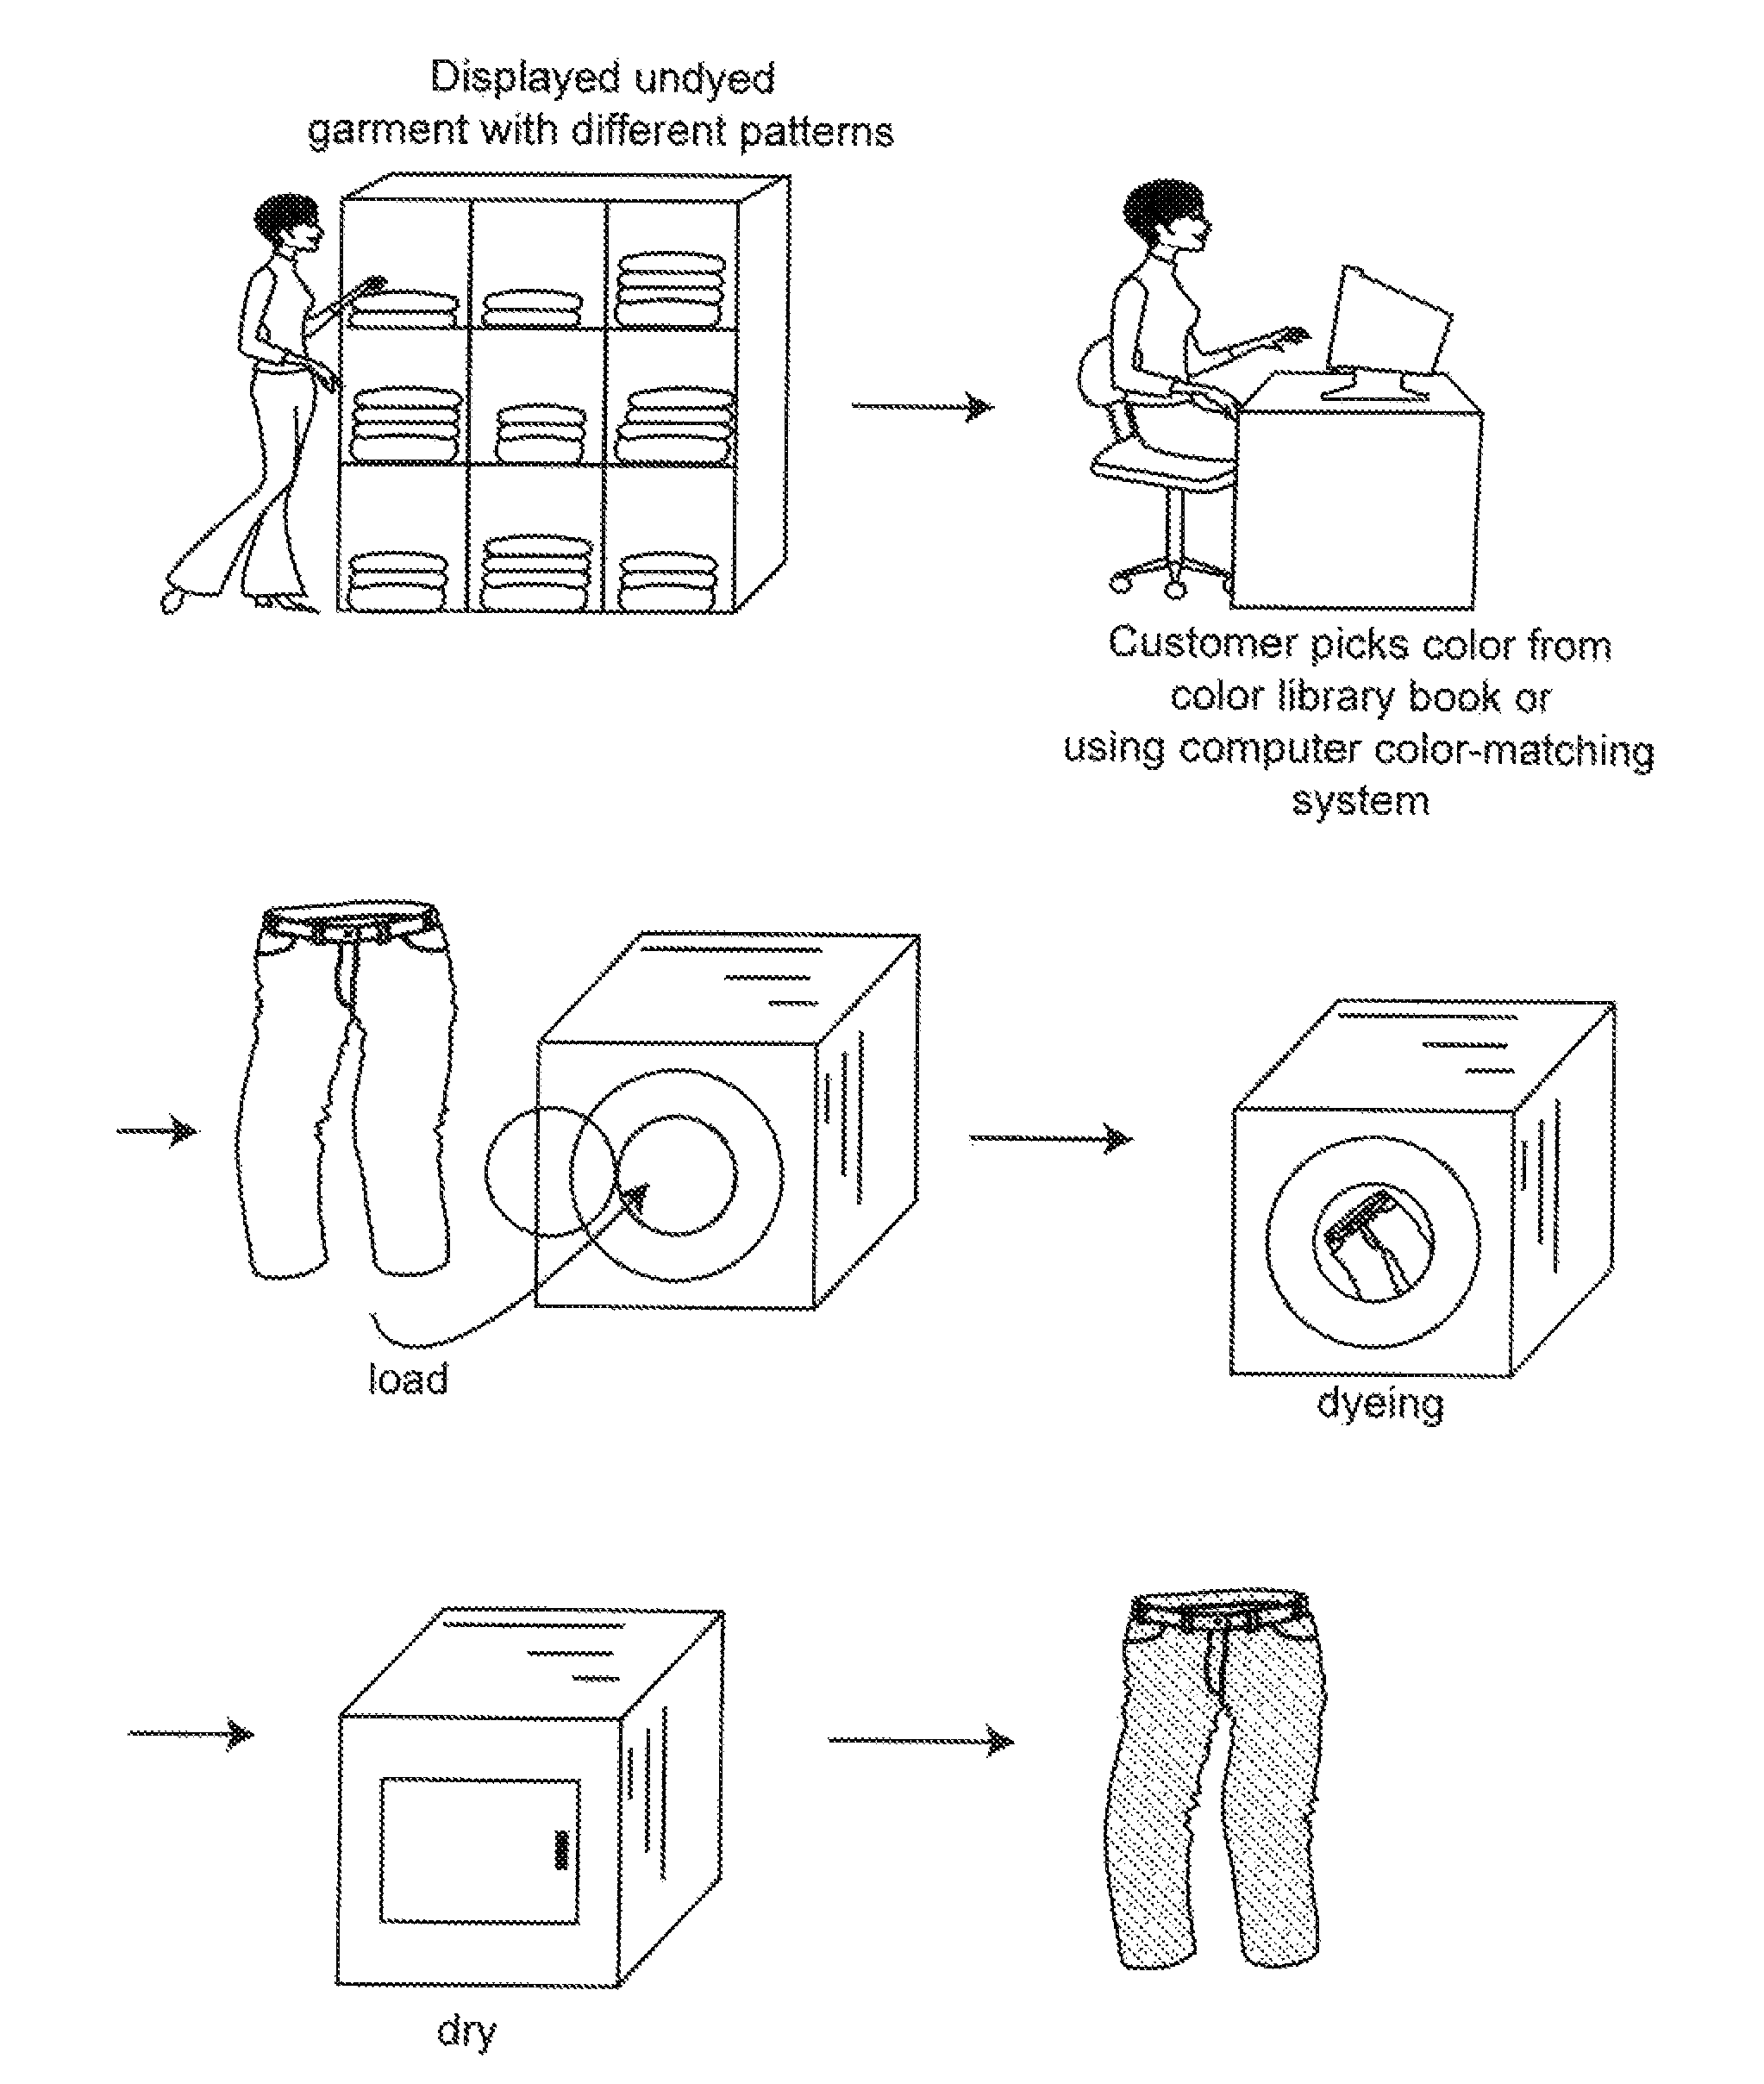 Customer-created textiles and method of producing same